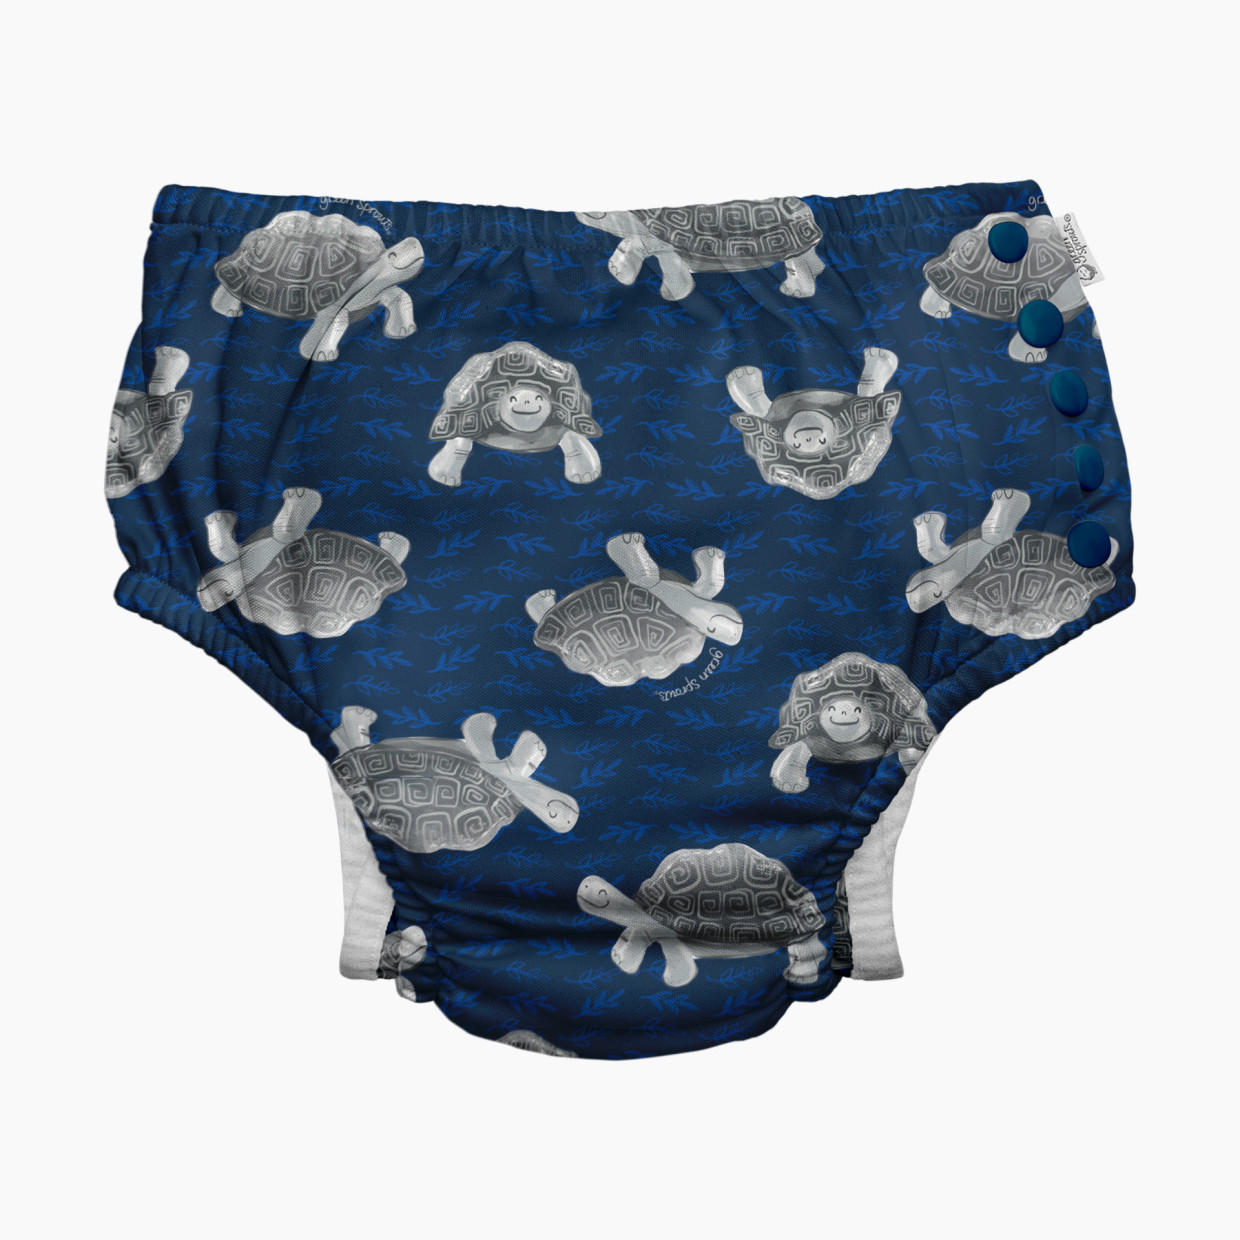 GREEN SPROUTS Eco Snap Swim Diaper - Navy Tortoises, 6 Months.